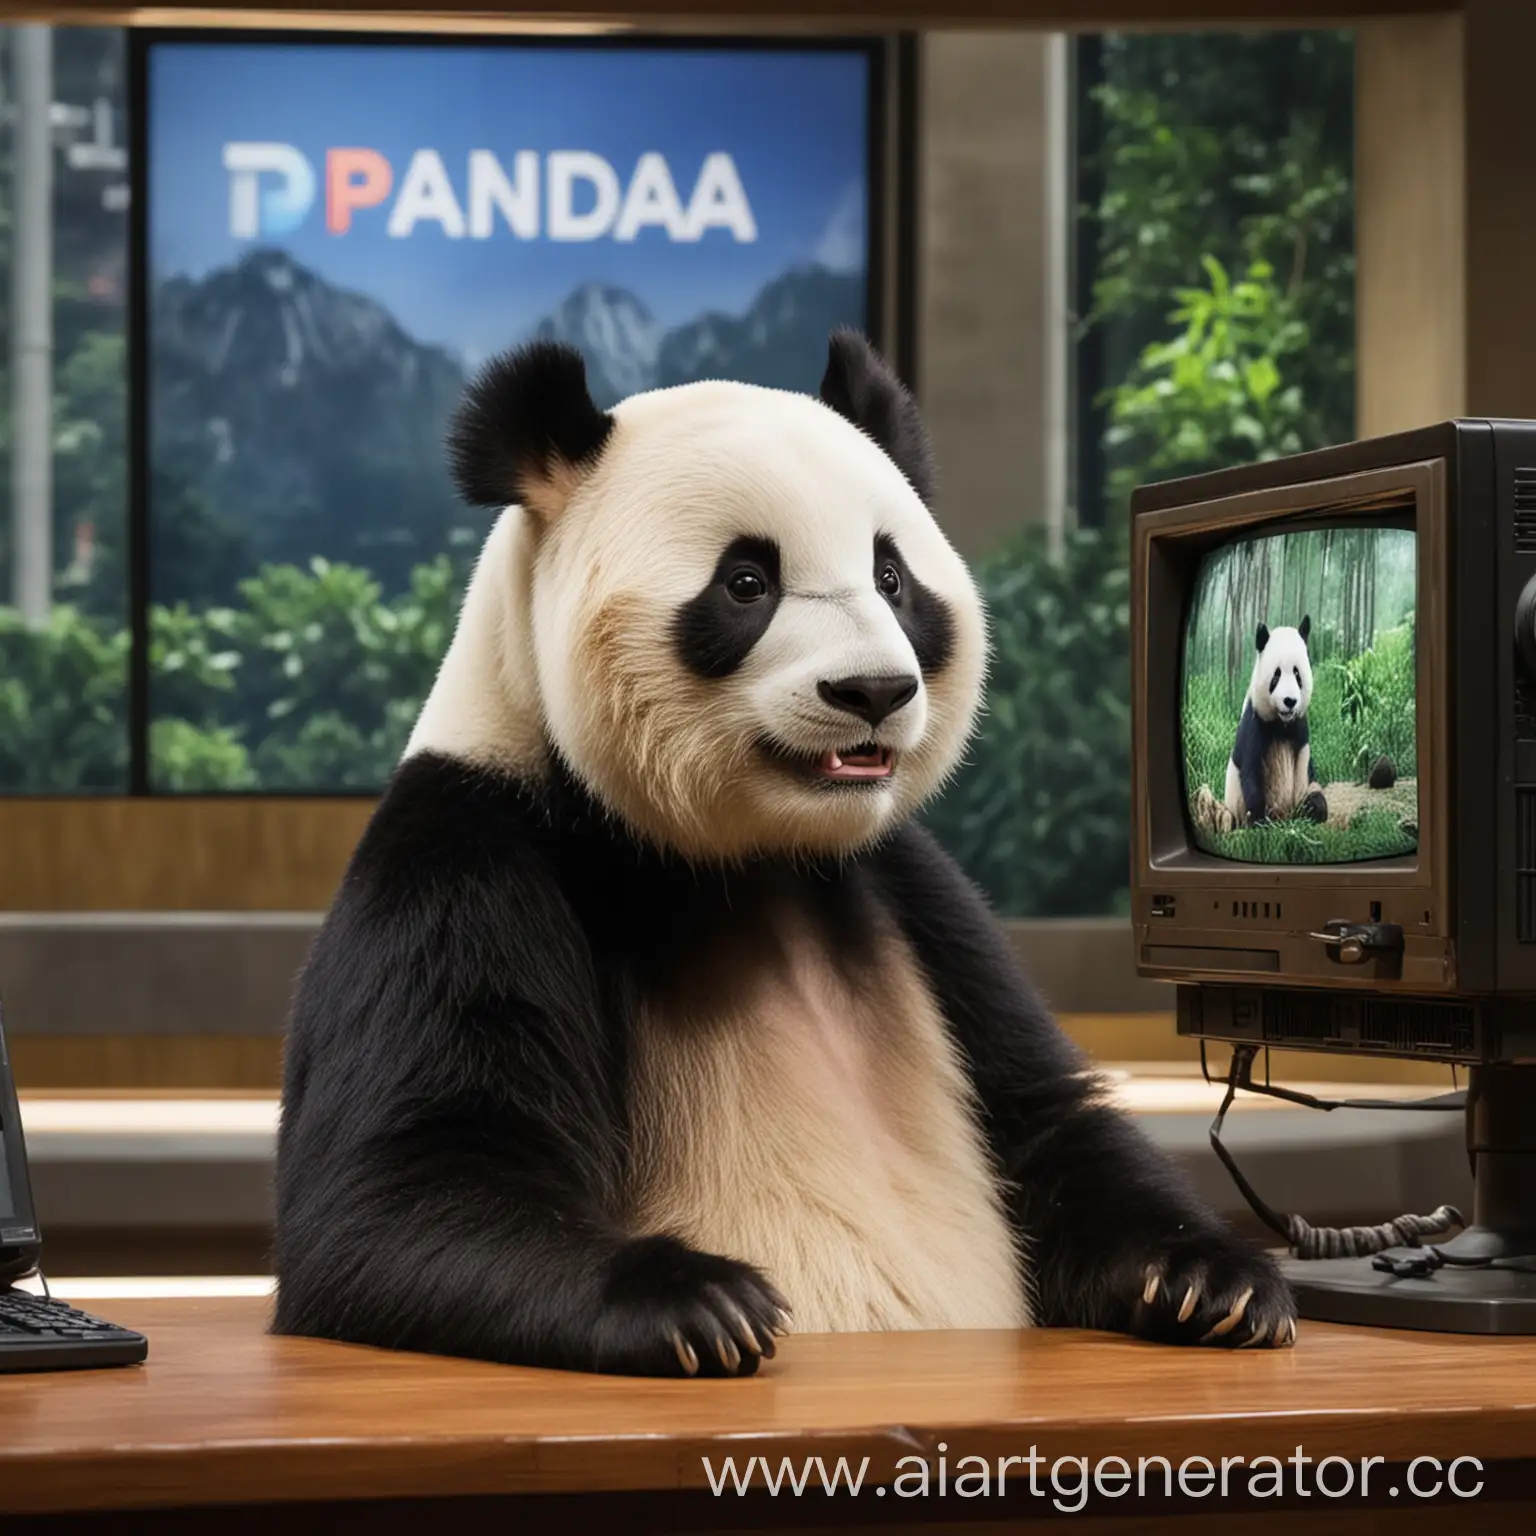 Professional-Panda-News-Anchor-Reporting-Current-Events